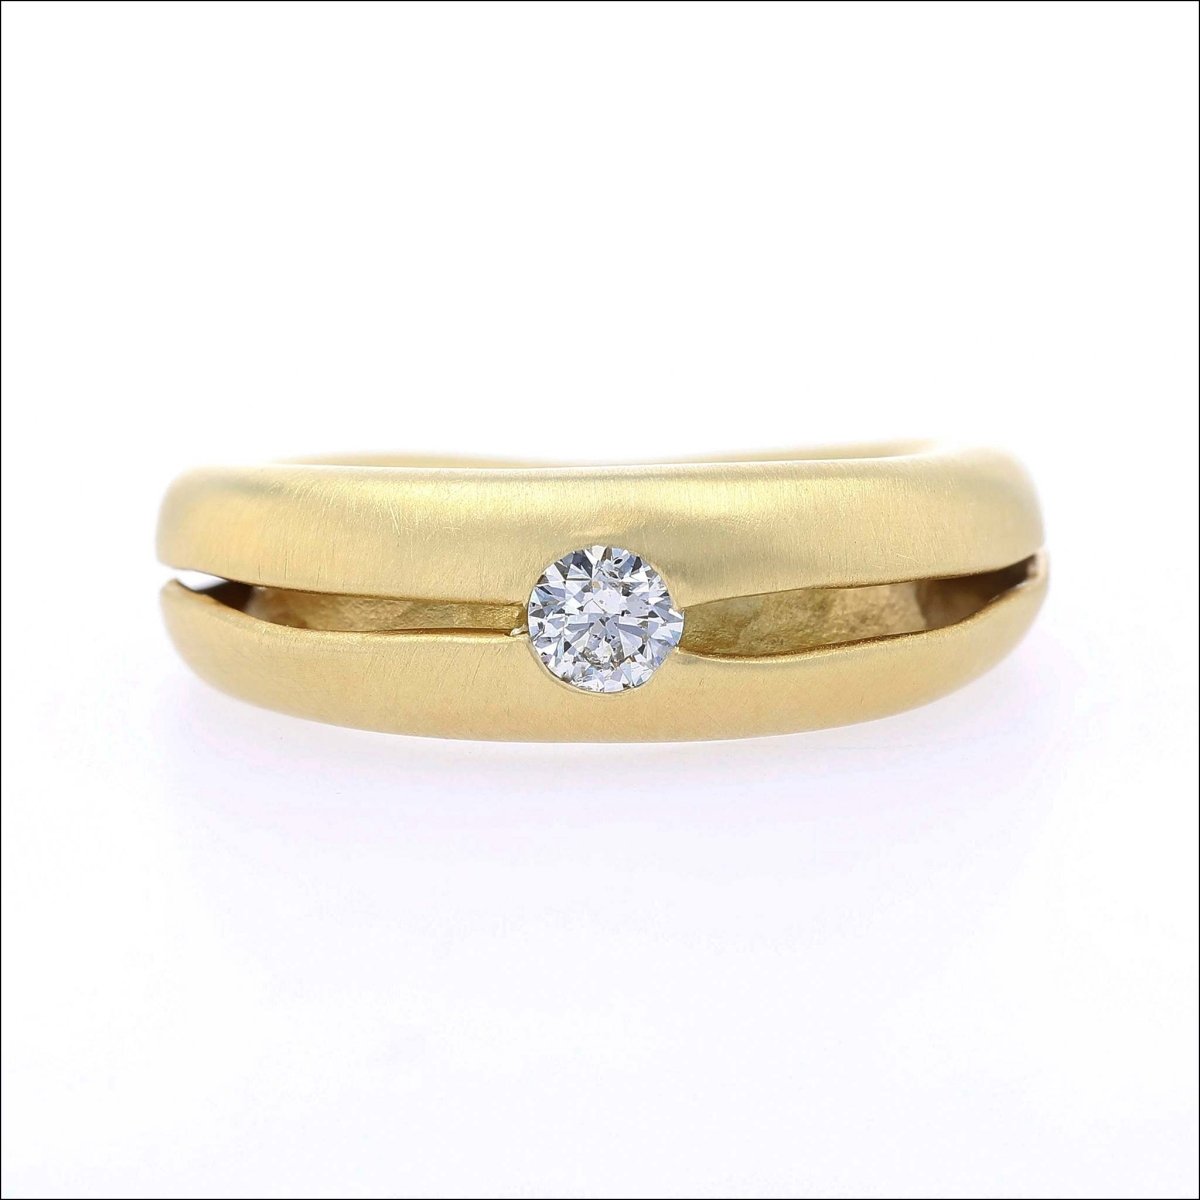 Diamond in a Fold Ring 18KY - JewelsmithBands